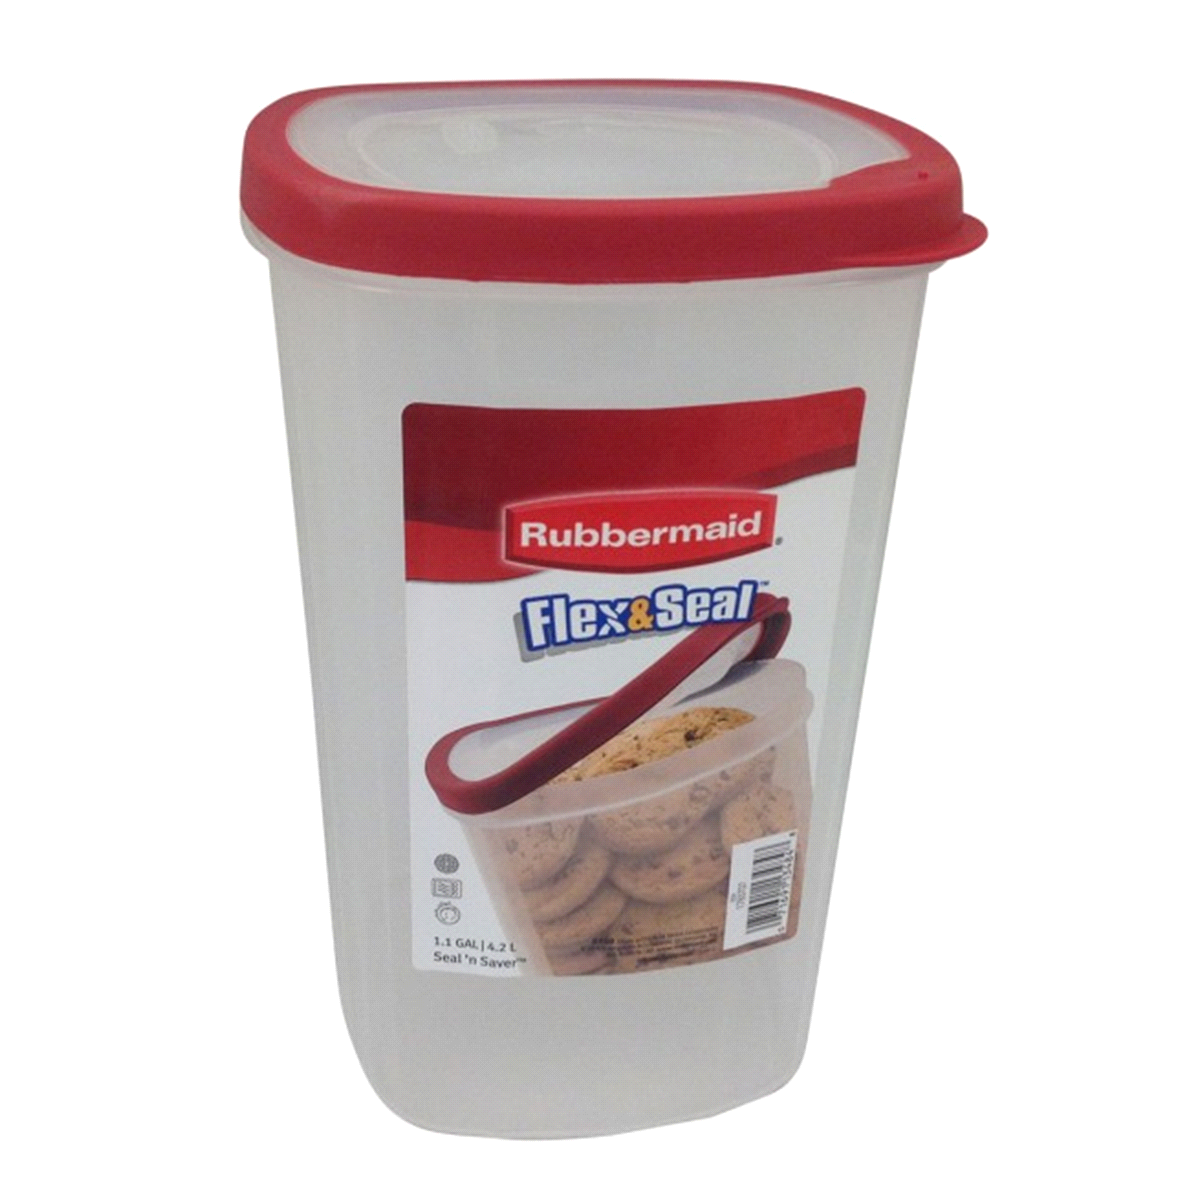 slide 1 of 1, Rubbermaid Flex And Seal Food Storage Container - Clear/Red, 1.1 gal